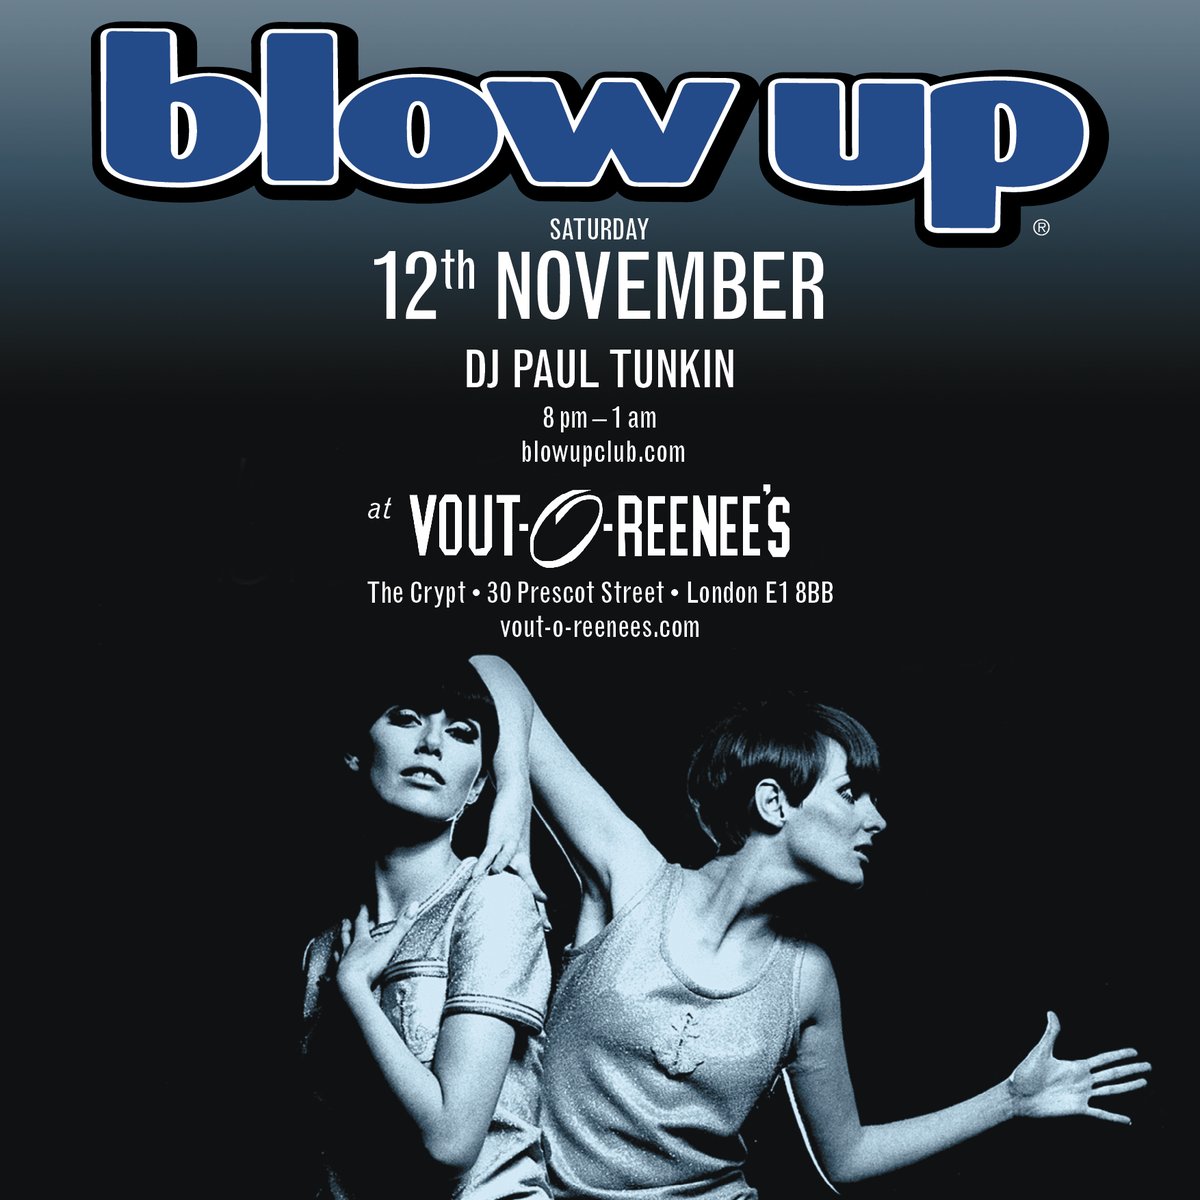 Tonight - Saturday 12th November - @BlowUp at Vout-O-Reenee's London. Doors 8pm-1am. DJ @PaulTunkin with guest DJ Davide Darroux. Nearest tube Aldgate East. See you there. #goingoutlondon #londonlife #londonclubbing #aldgateeast